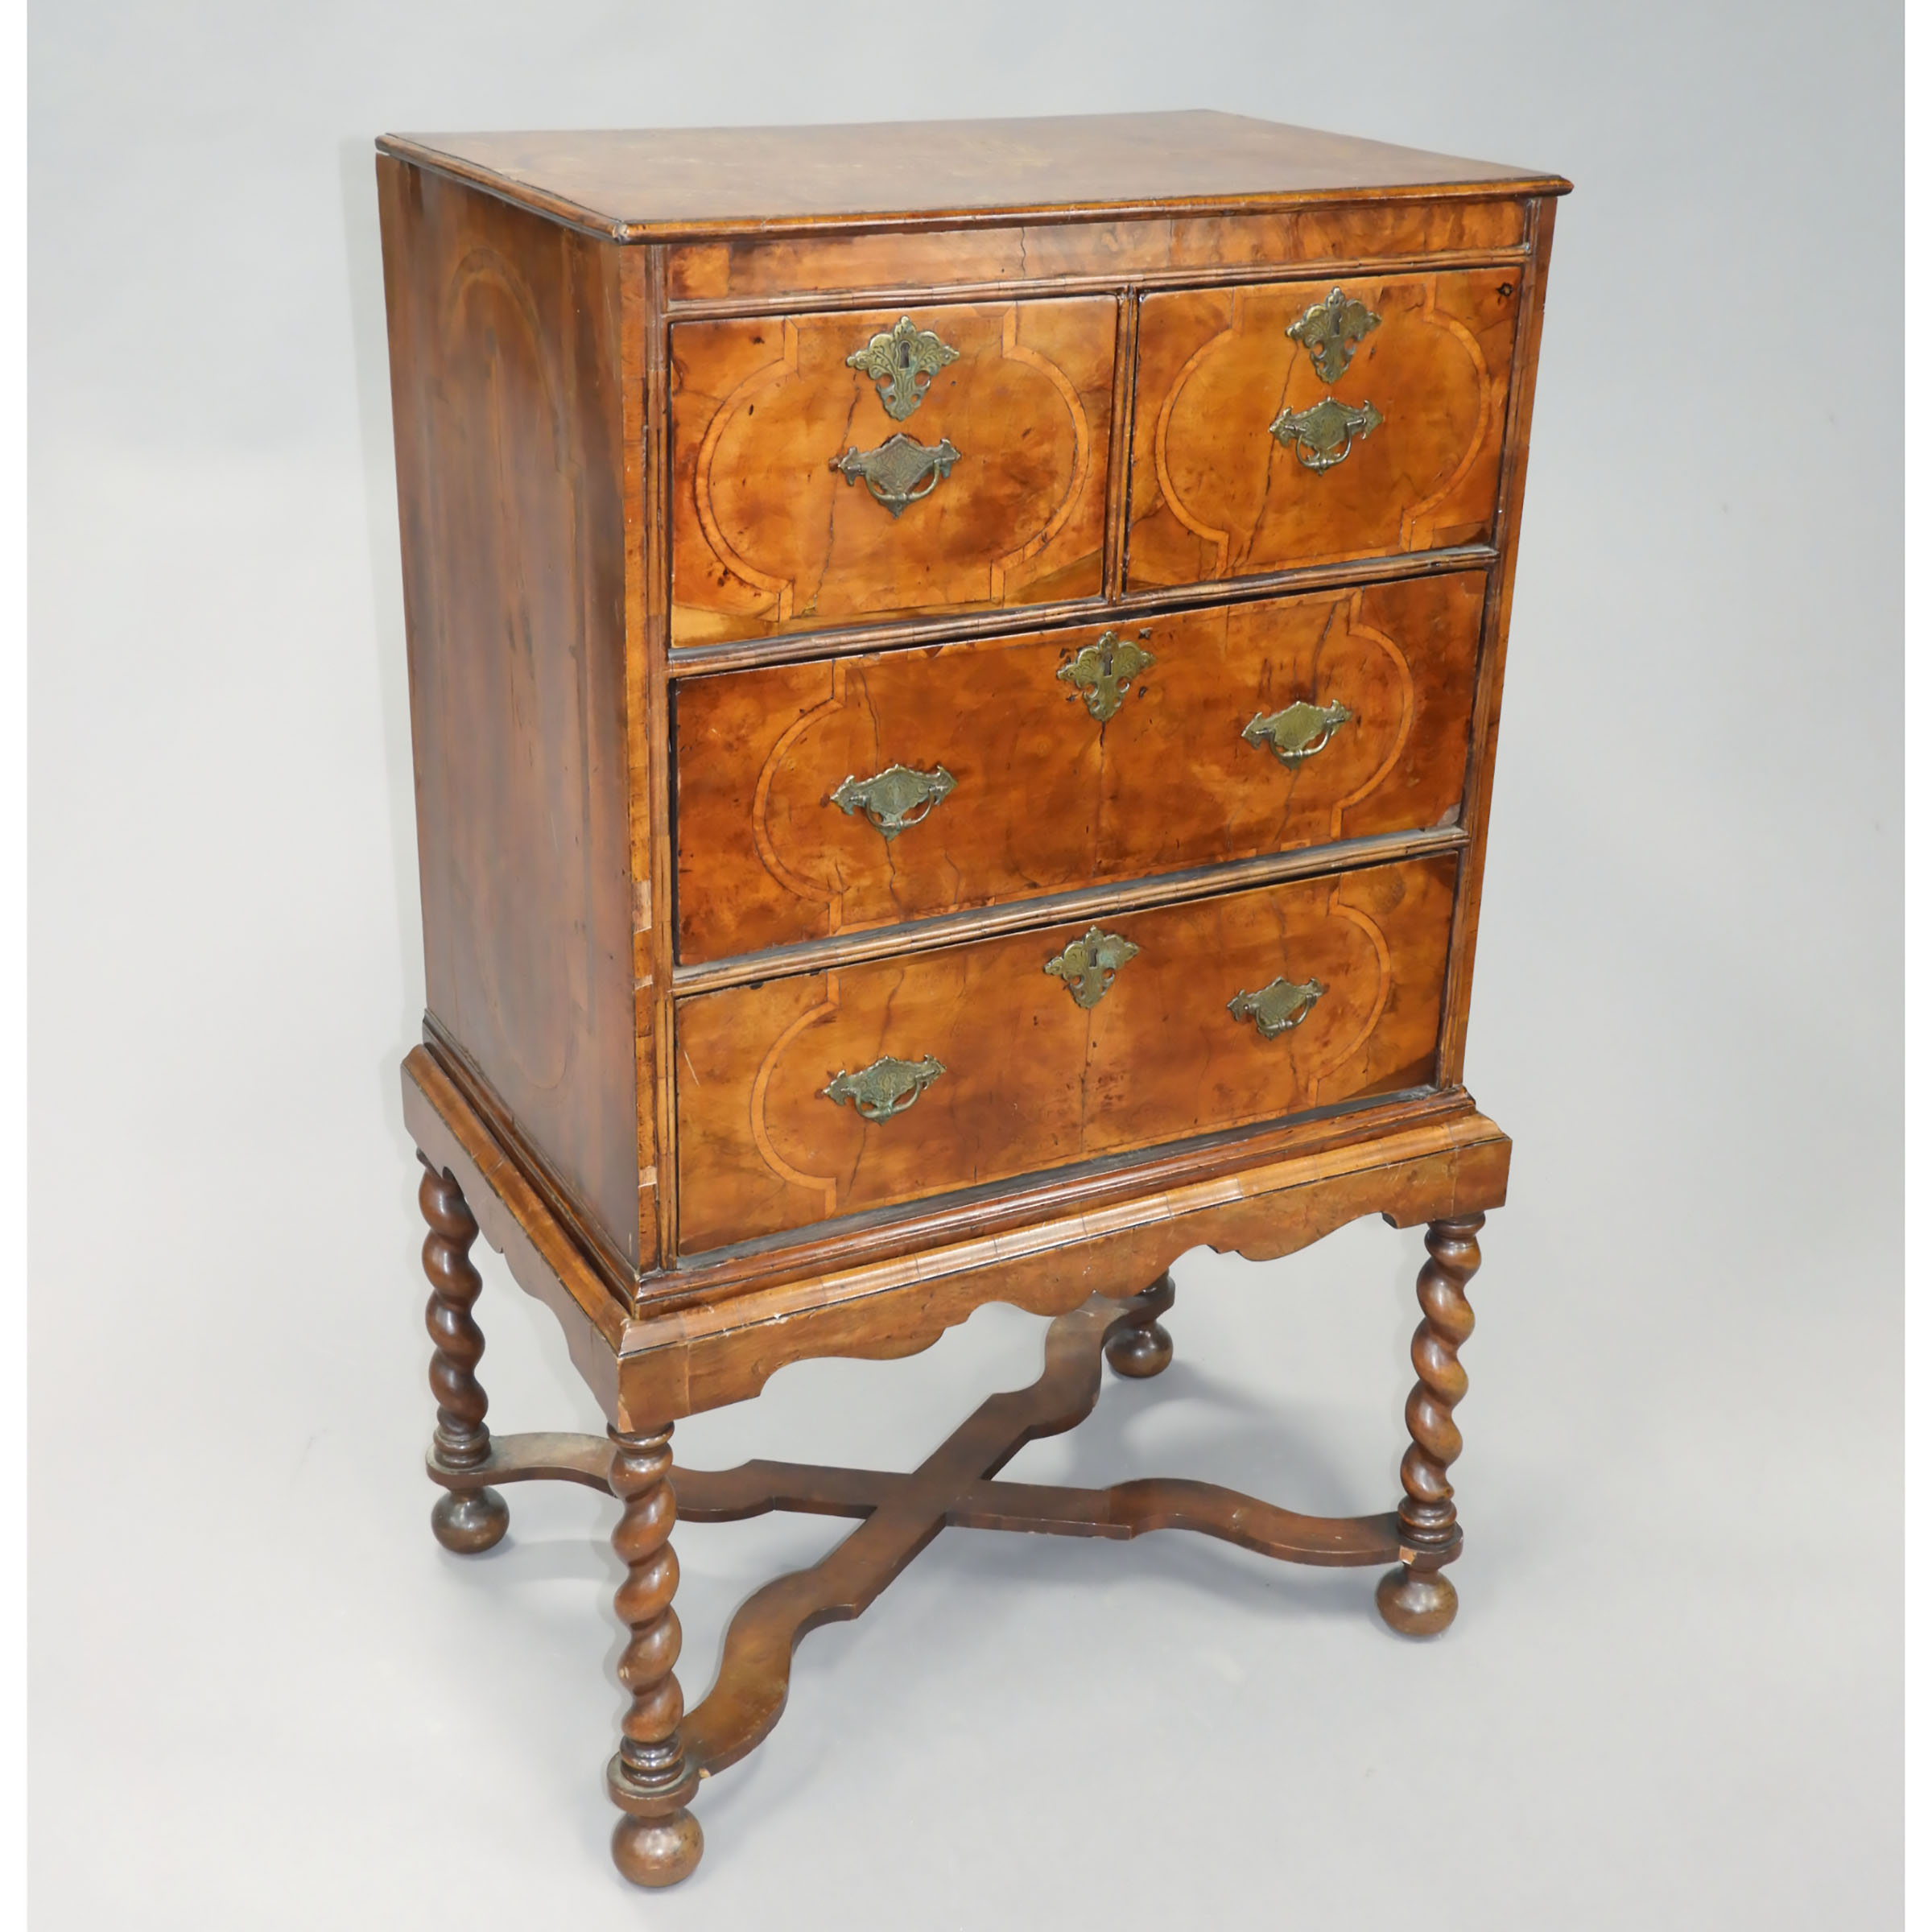 Small William and Mary Inlaid Figured Walnut Chest on Stand, early 18th century